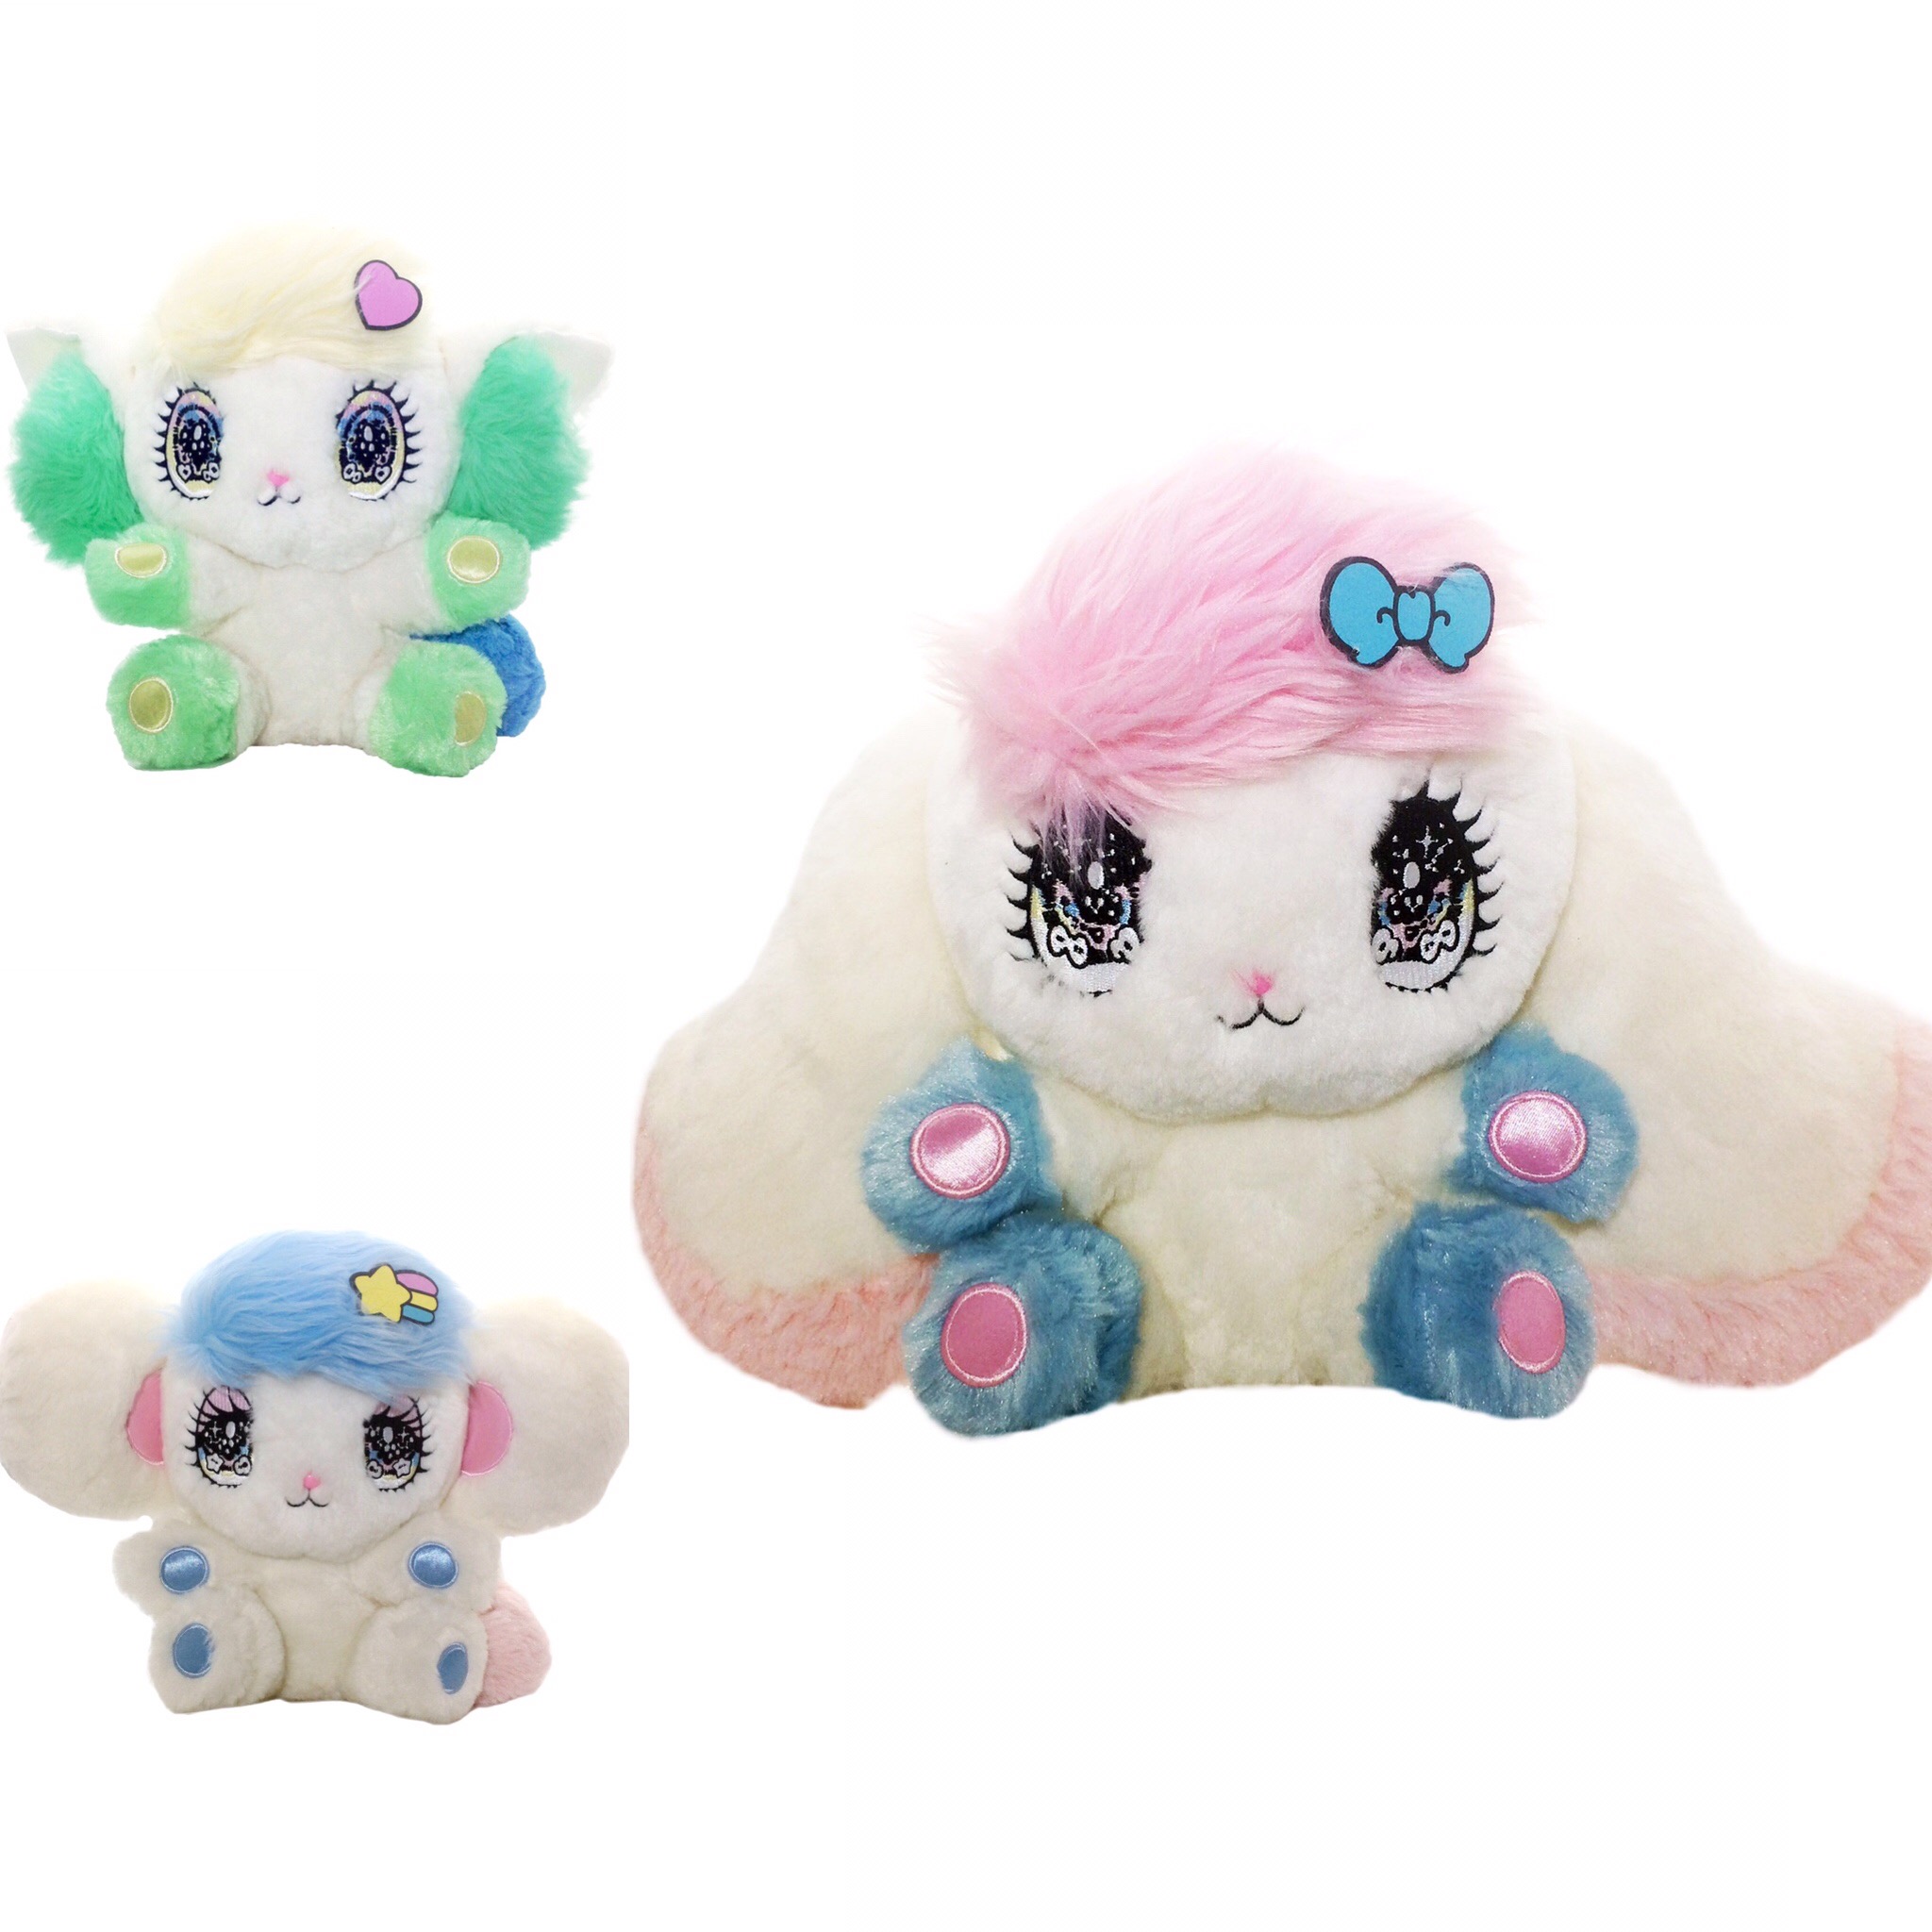 Japanese Anime Peropero Sparkles MELO CUNE RUE Plush Doll Toy New